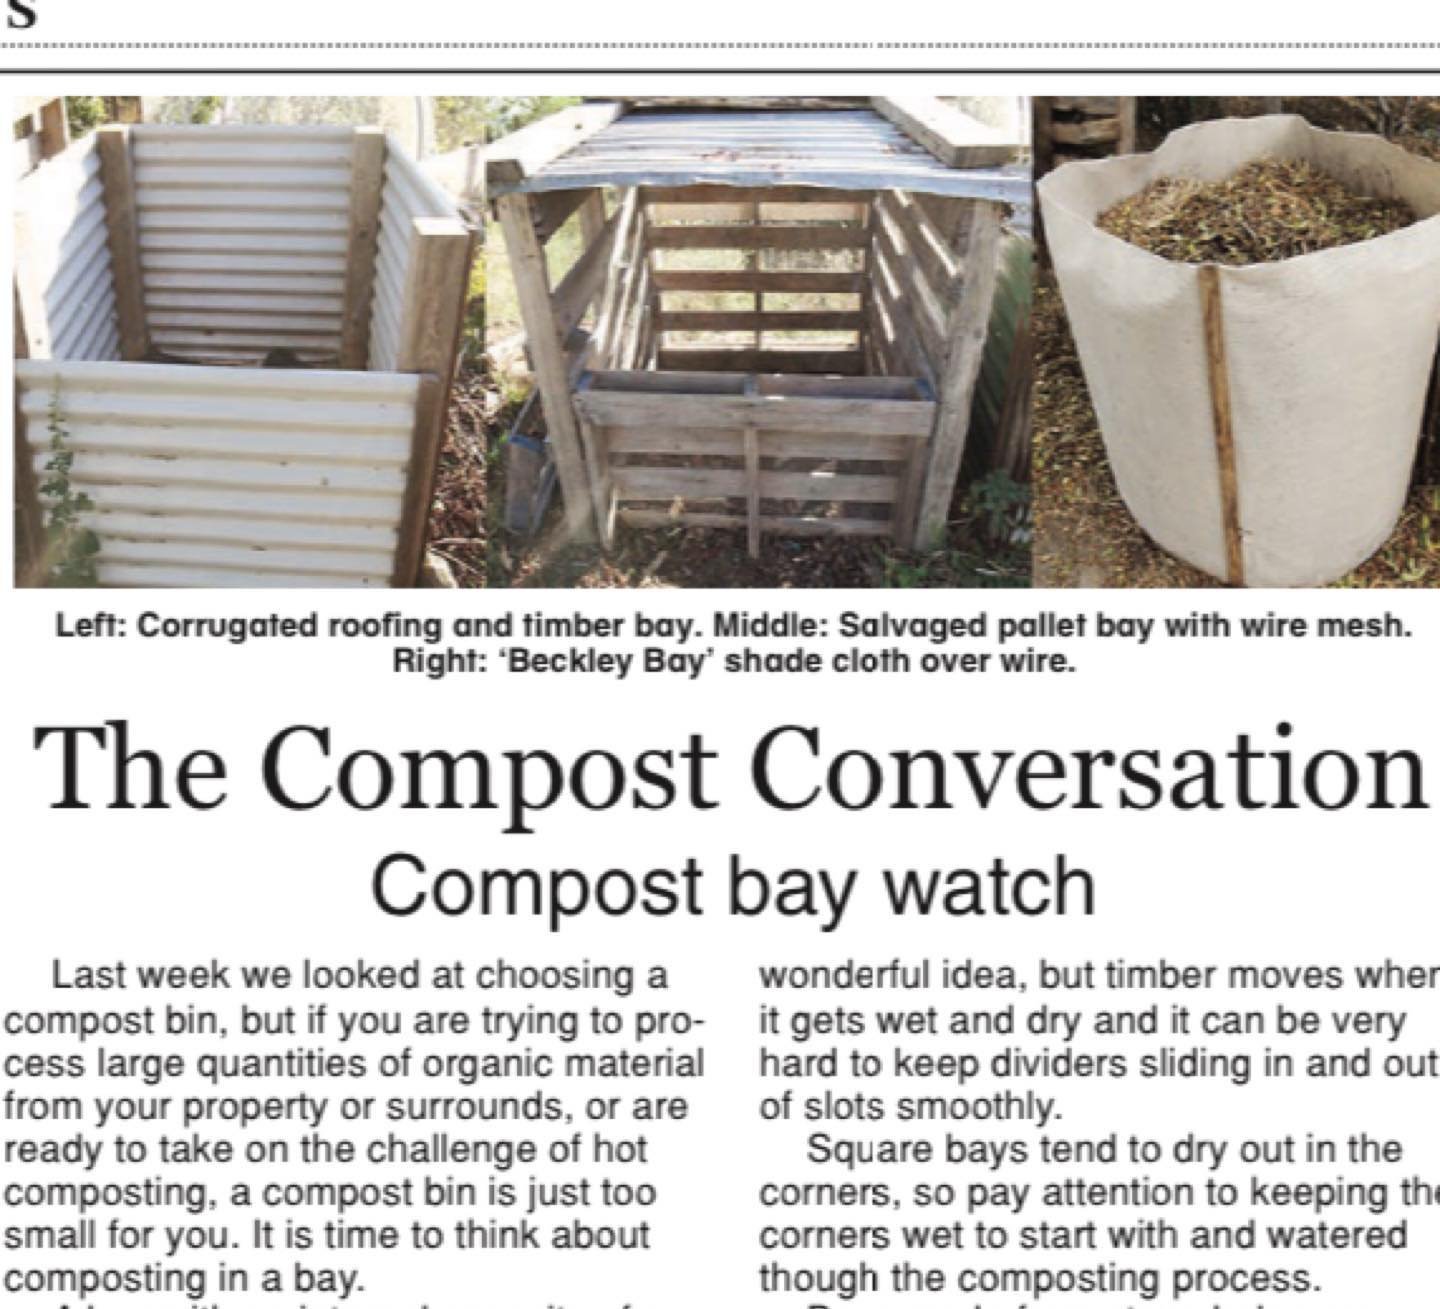 #37 the conversation continues about different types of compost bays, the pros and cons, but above all else, the quality of the compost recipe remains the key ingredient. 
#full article on our website. #yimbycompost